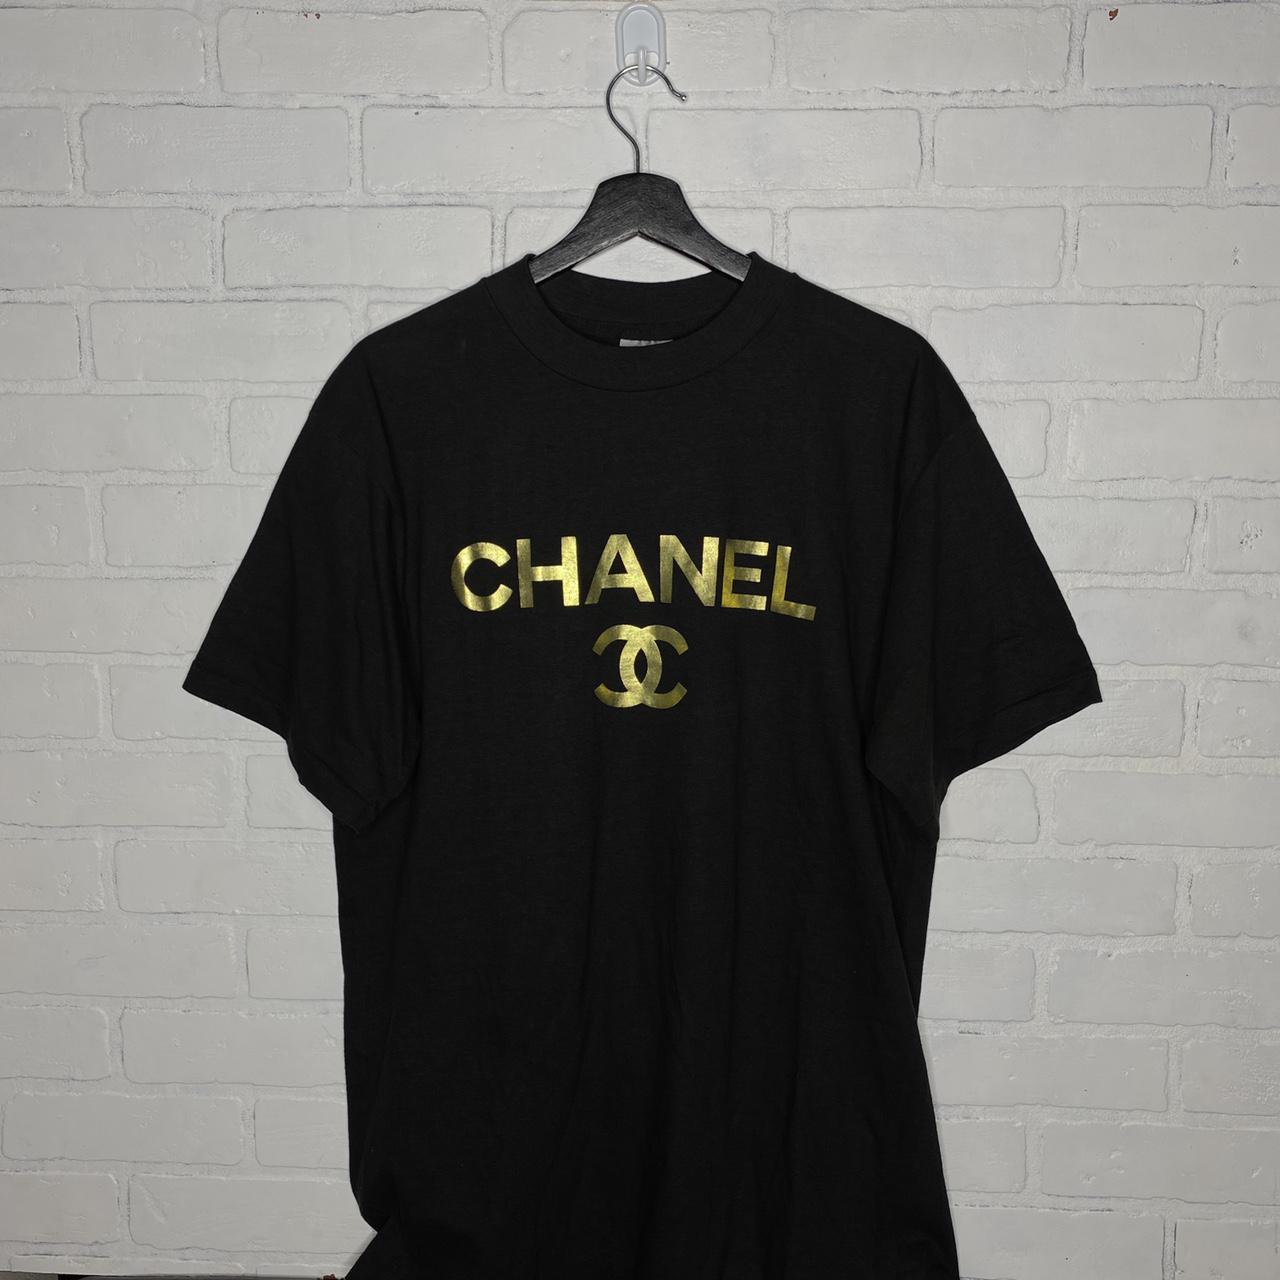 Men's Chanel T-shirts, New & Used